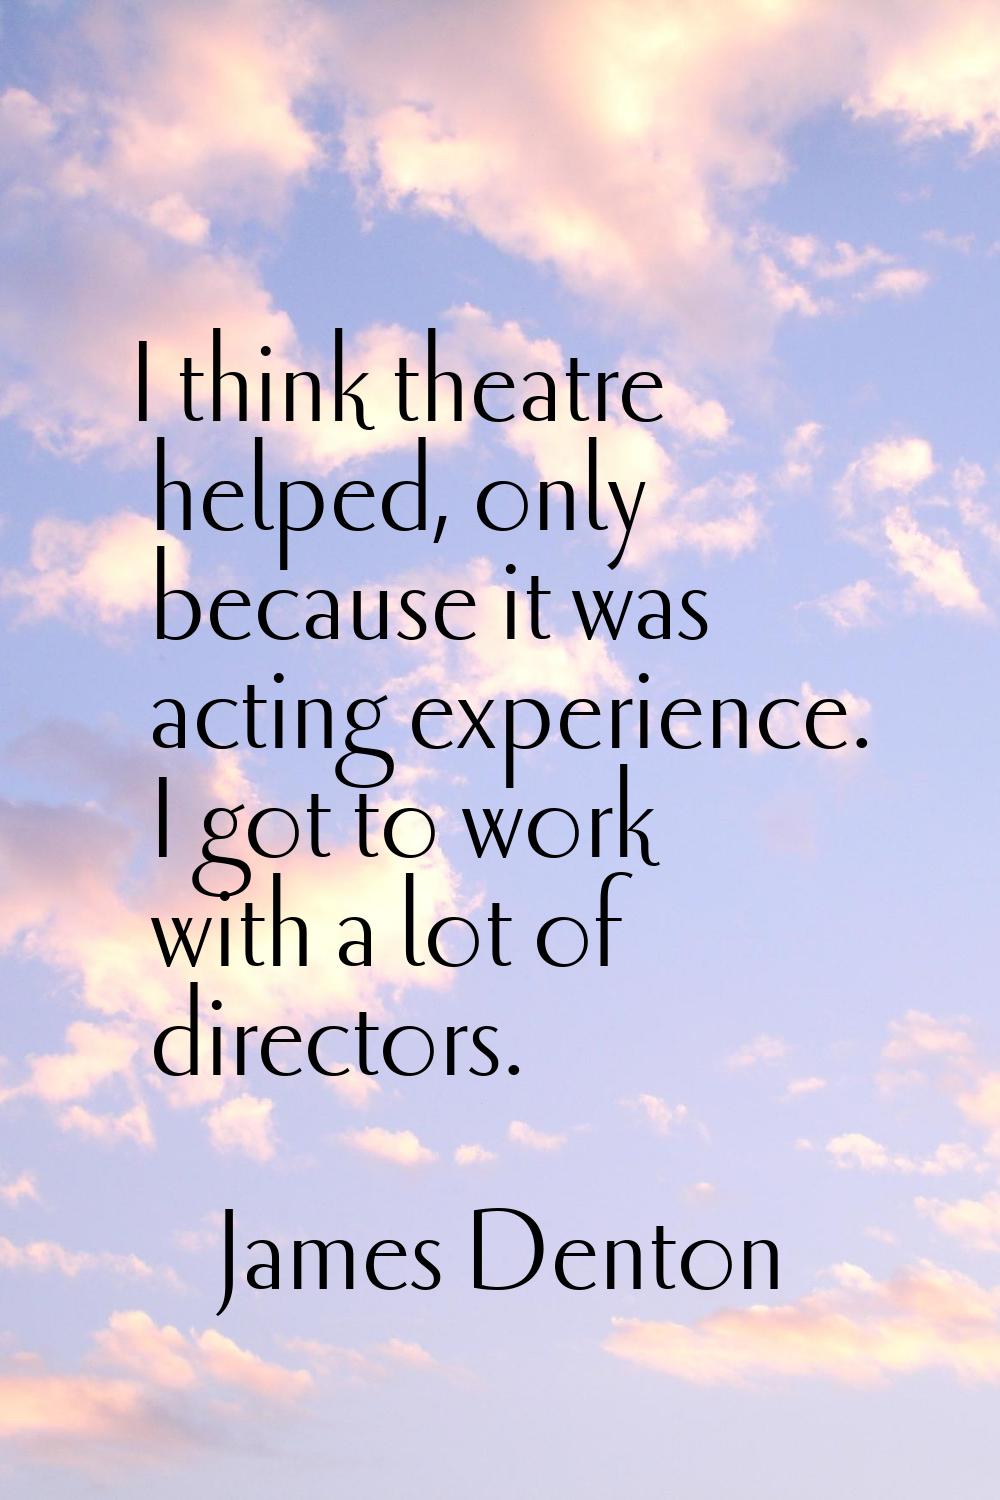 I think theatre helped, only because it was acting experience. I got to work with a lot of director